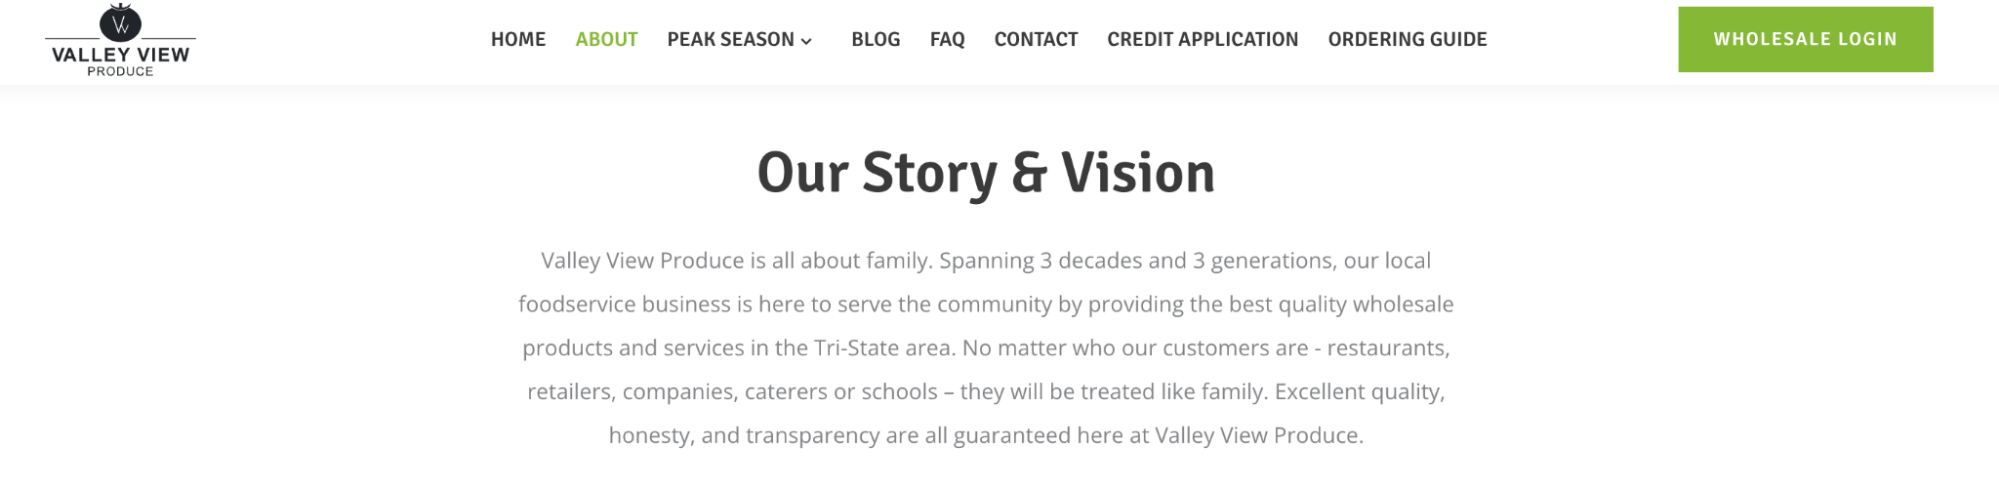 Story and Vision page on Valley View Produce’s website.